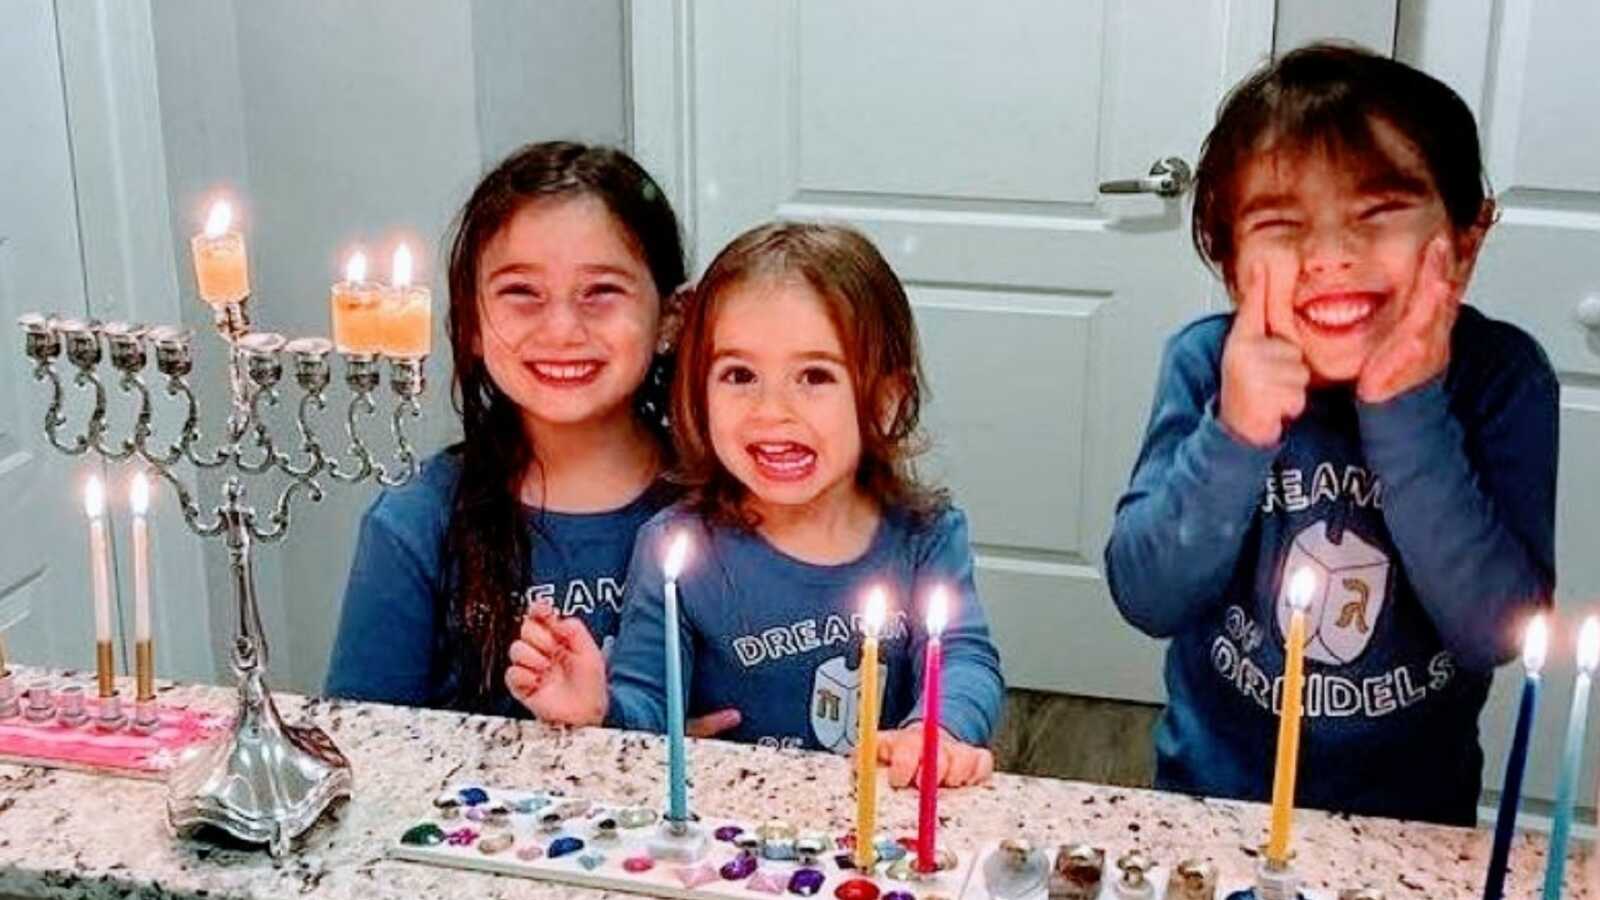 Mom shares sweet photo of her three daughters smiling hard during Hanukkah celebration